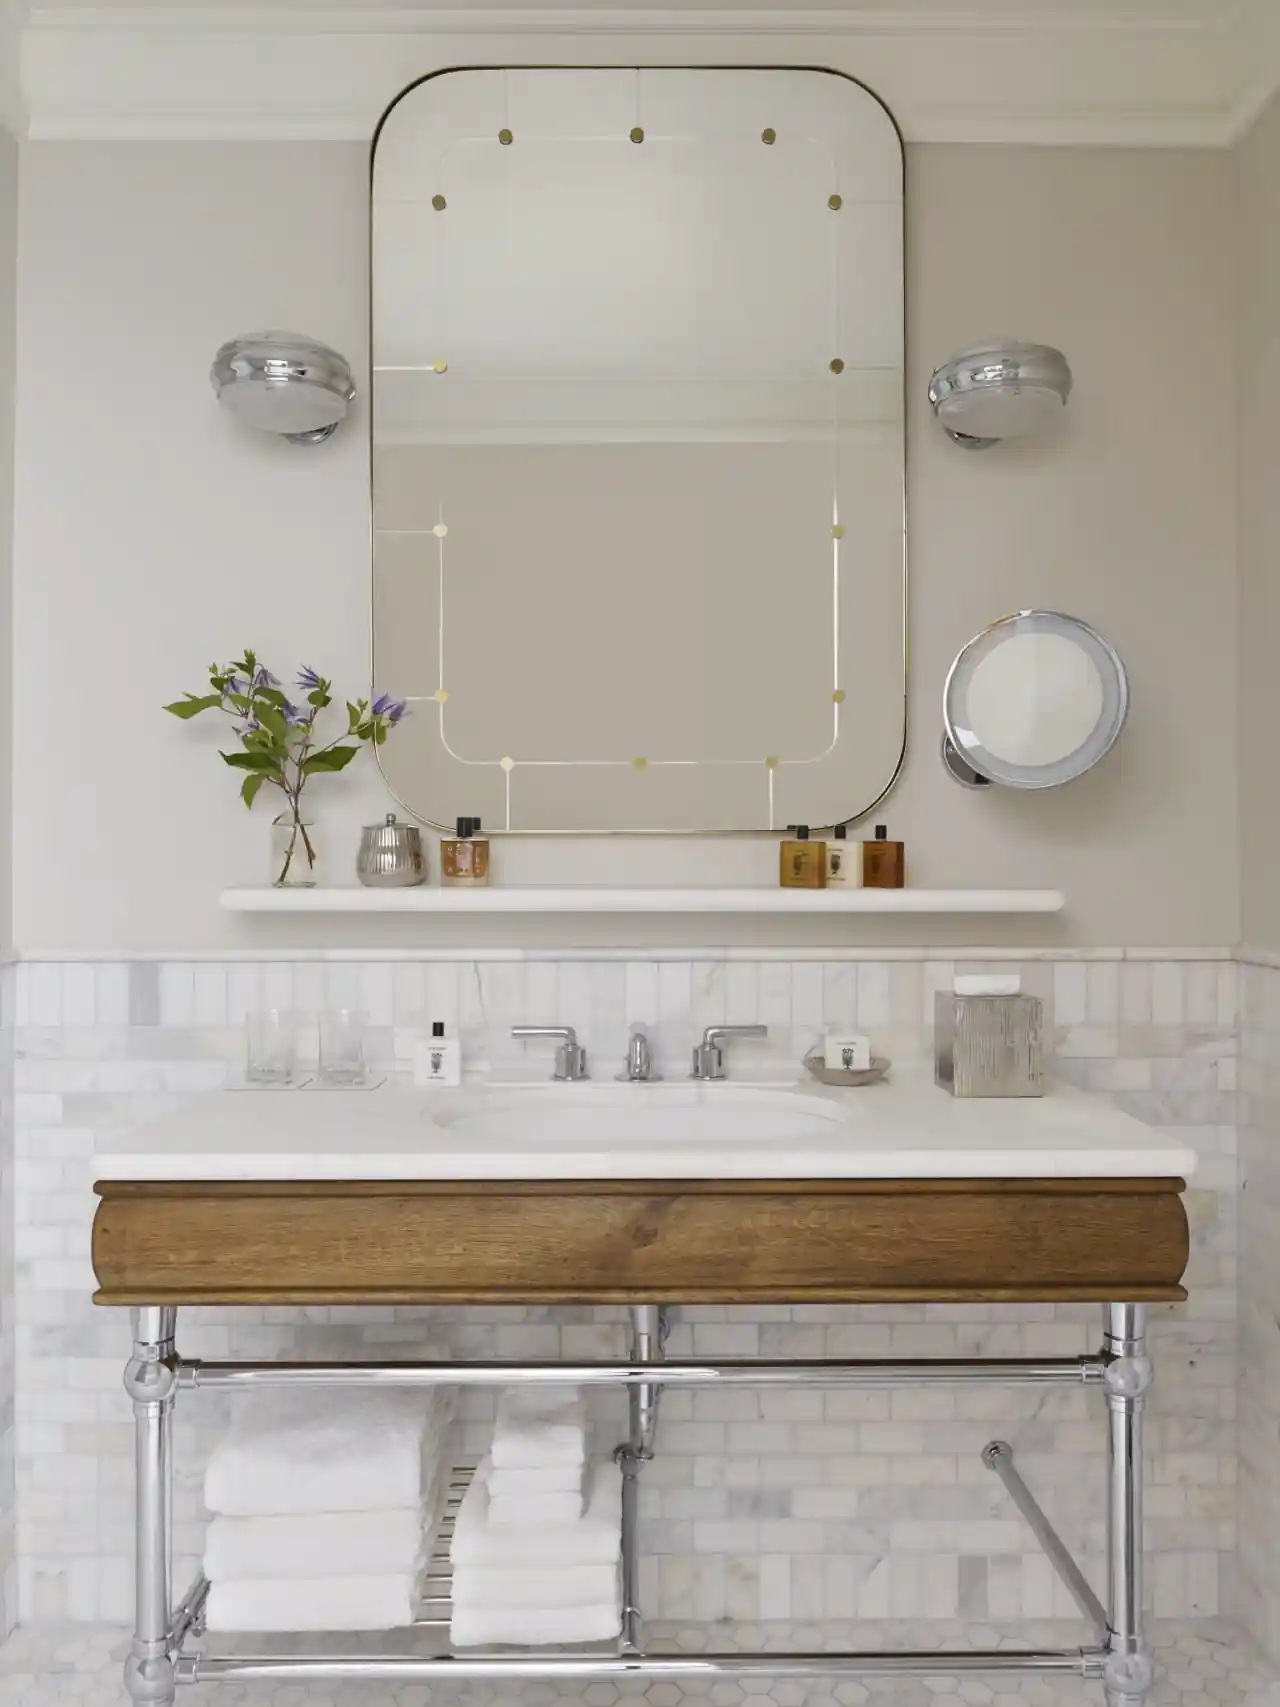 A large size mirror just hanging above the wash basin